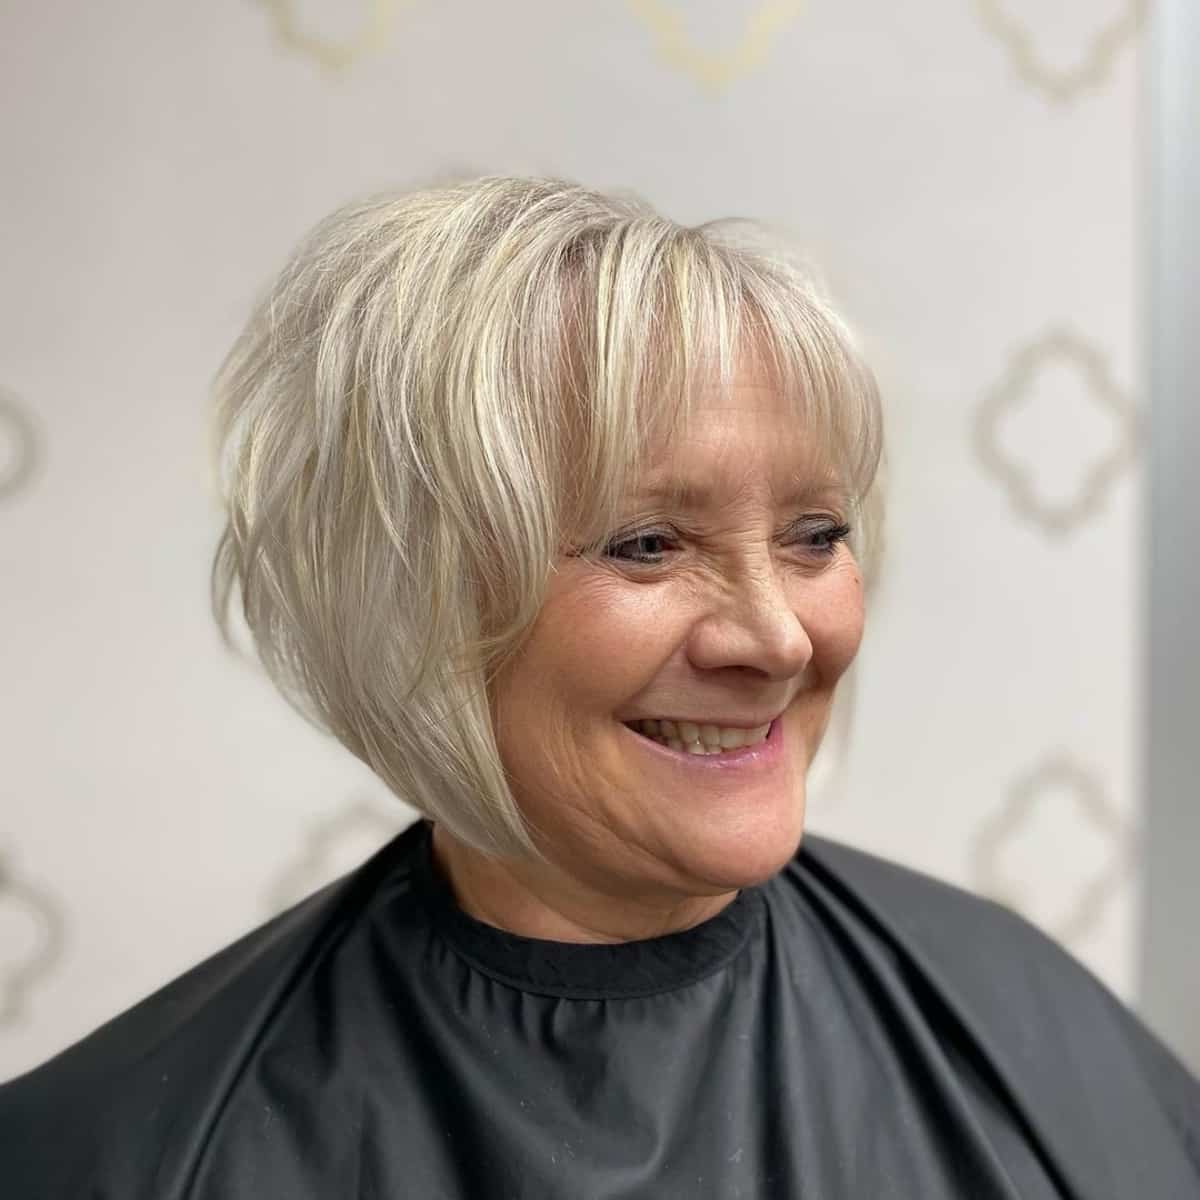 20 Volumizing Short Haircuts for Women Over 60 with Fine Hair